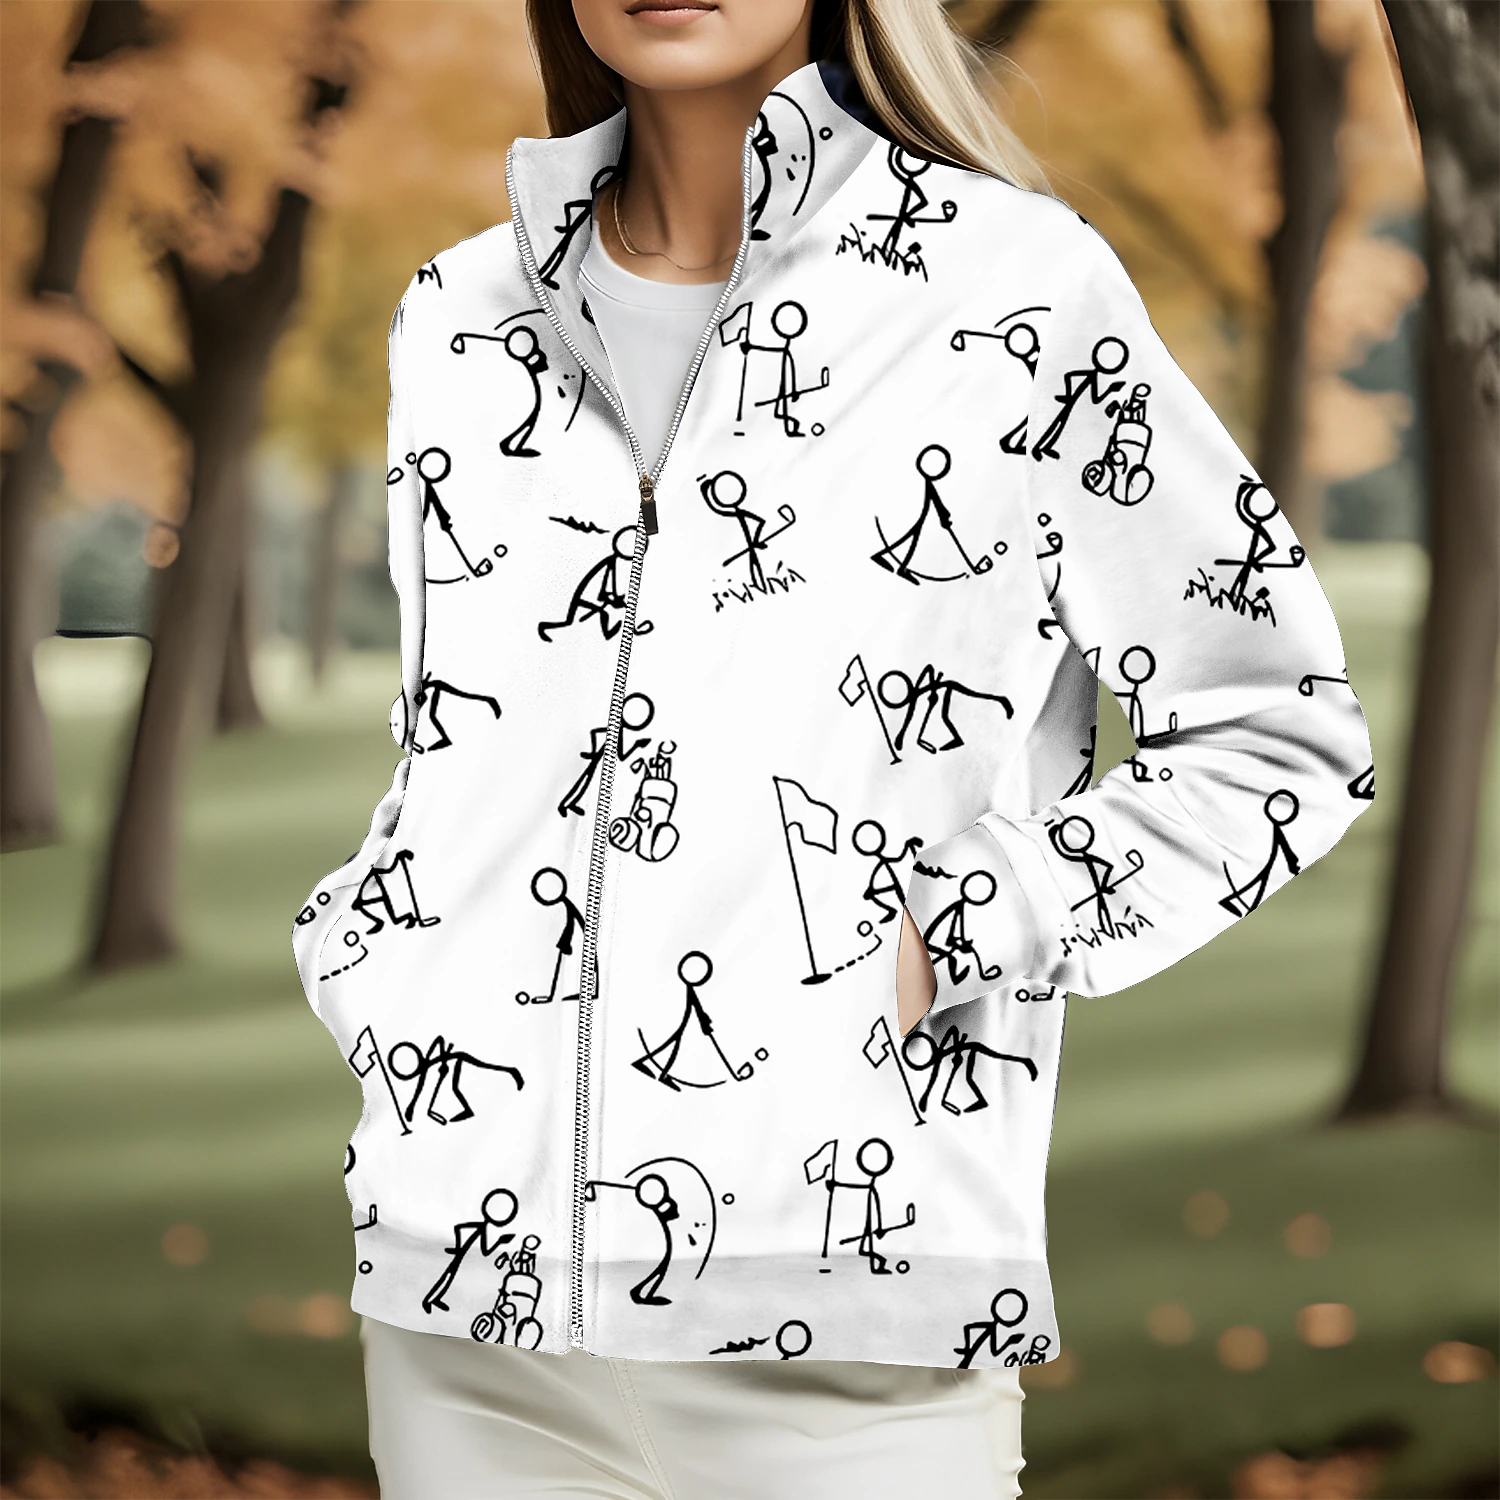 Women's Golf Hoodie Golf Pullover Golf Sweatshirt Thermal Warm Breathable Moisture Wicking Long Sleeve Golf Outerwear Top Regular Fit Side Pockets Full Zip Funny Printed Spring Autumn Tennis Golf 2023 - € 27.99 –P1